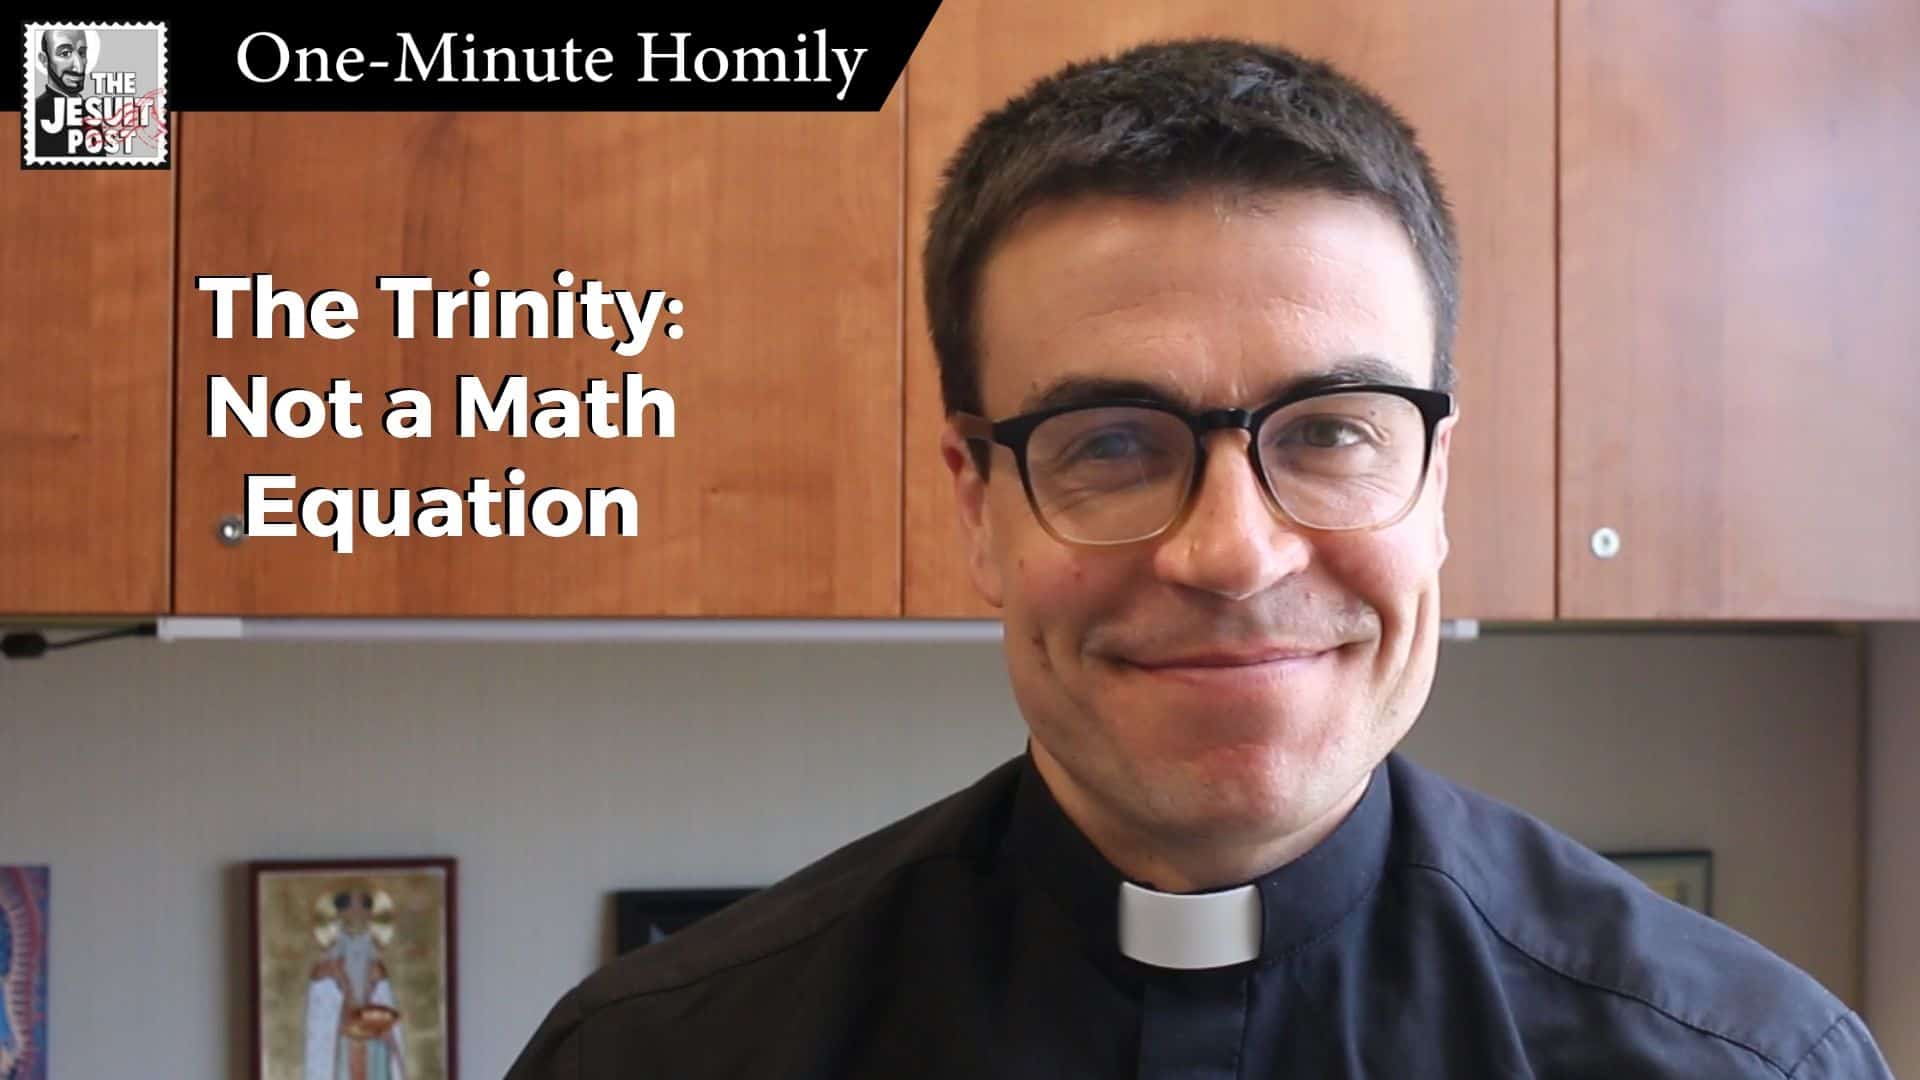 One-Minute Homily: “The Trinity: Not a Math Equation”